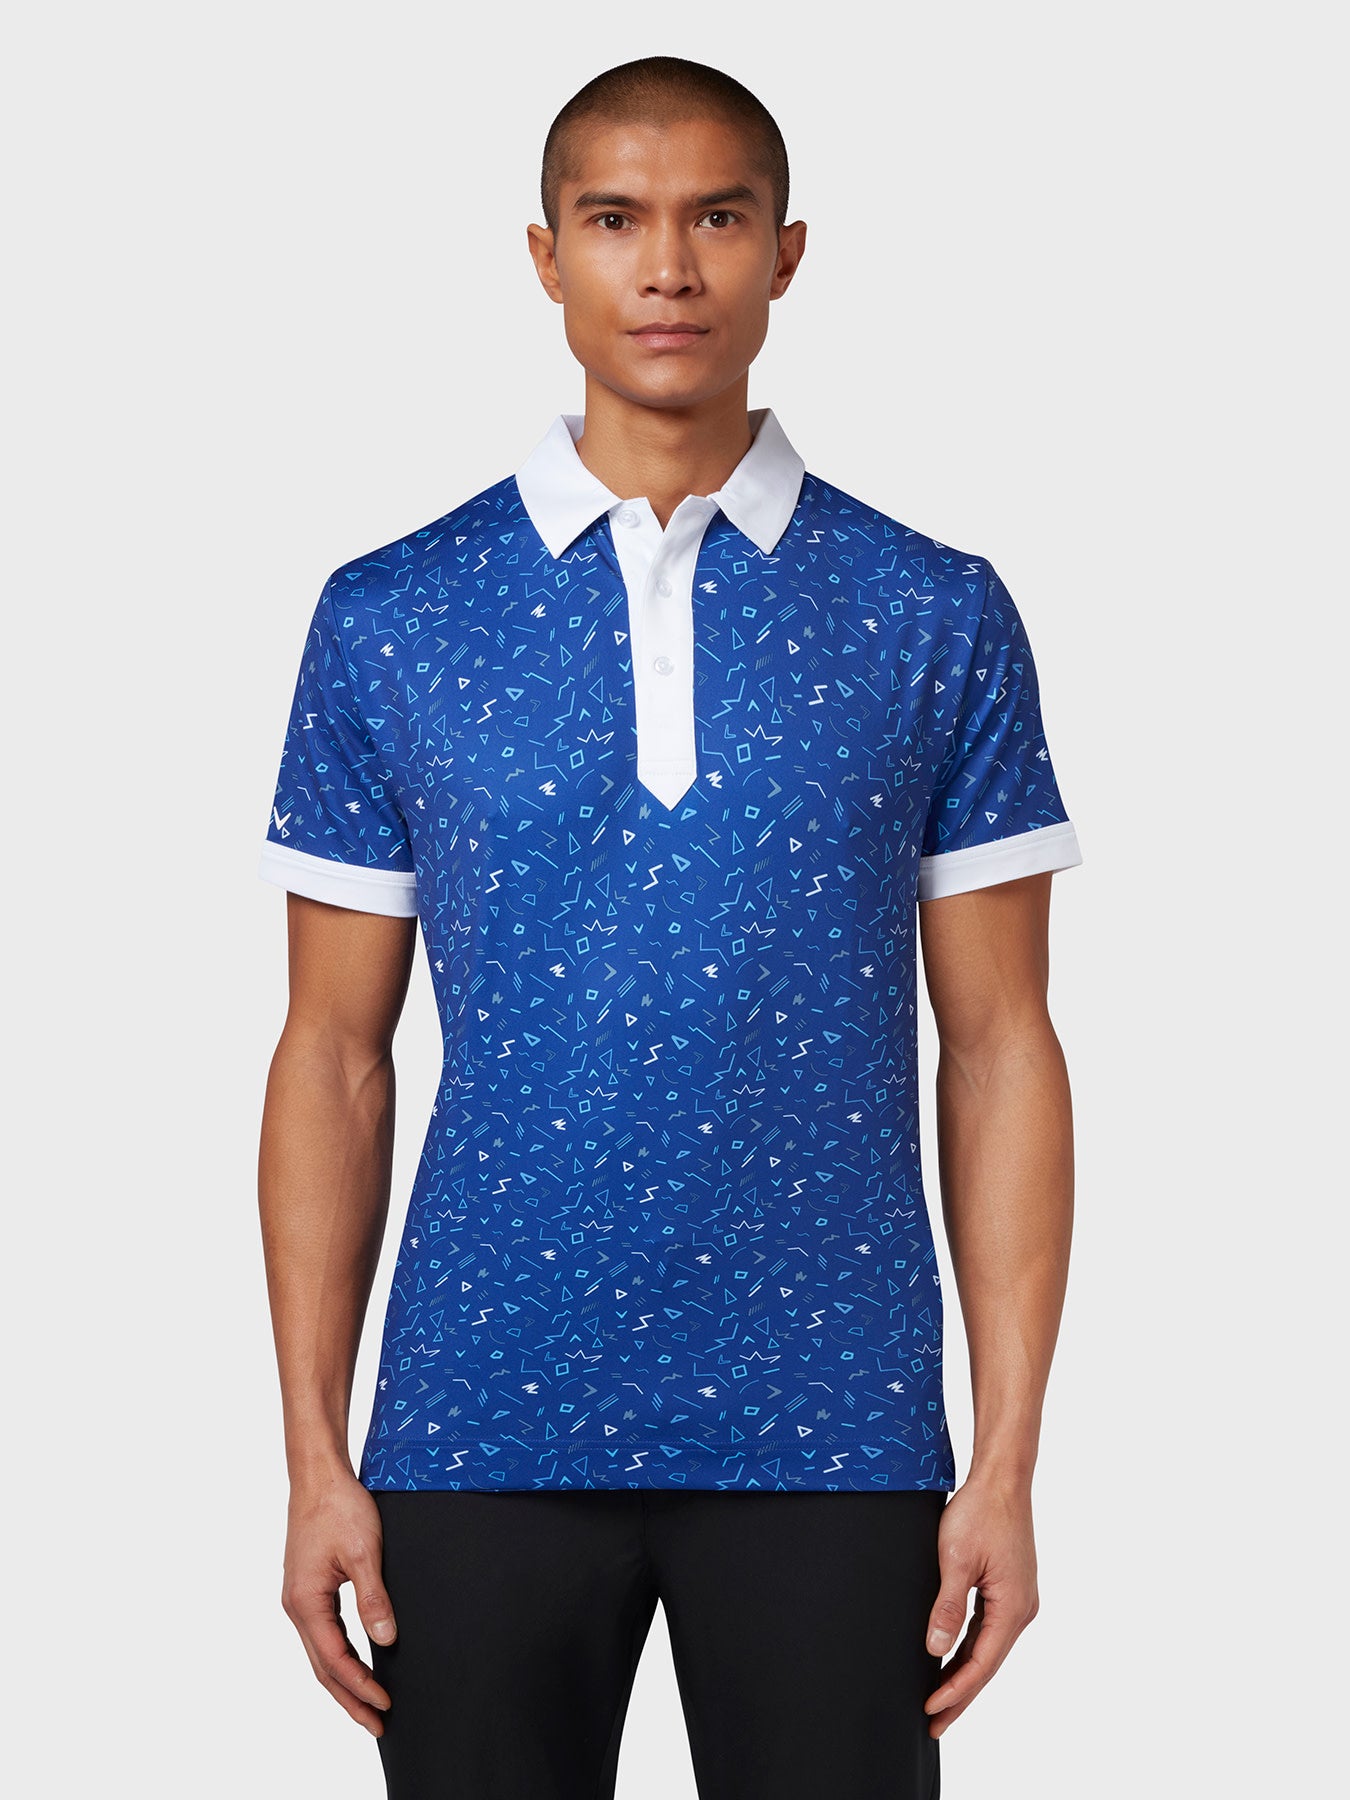 View X Series Chev Memphis All Over Print Polo In Clematis Blue Clematis Blue M information